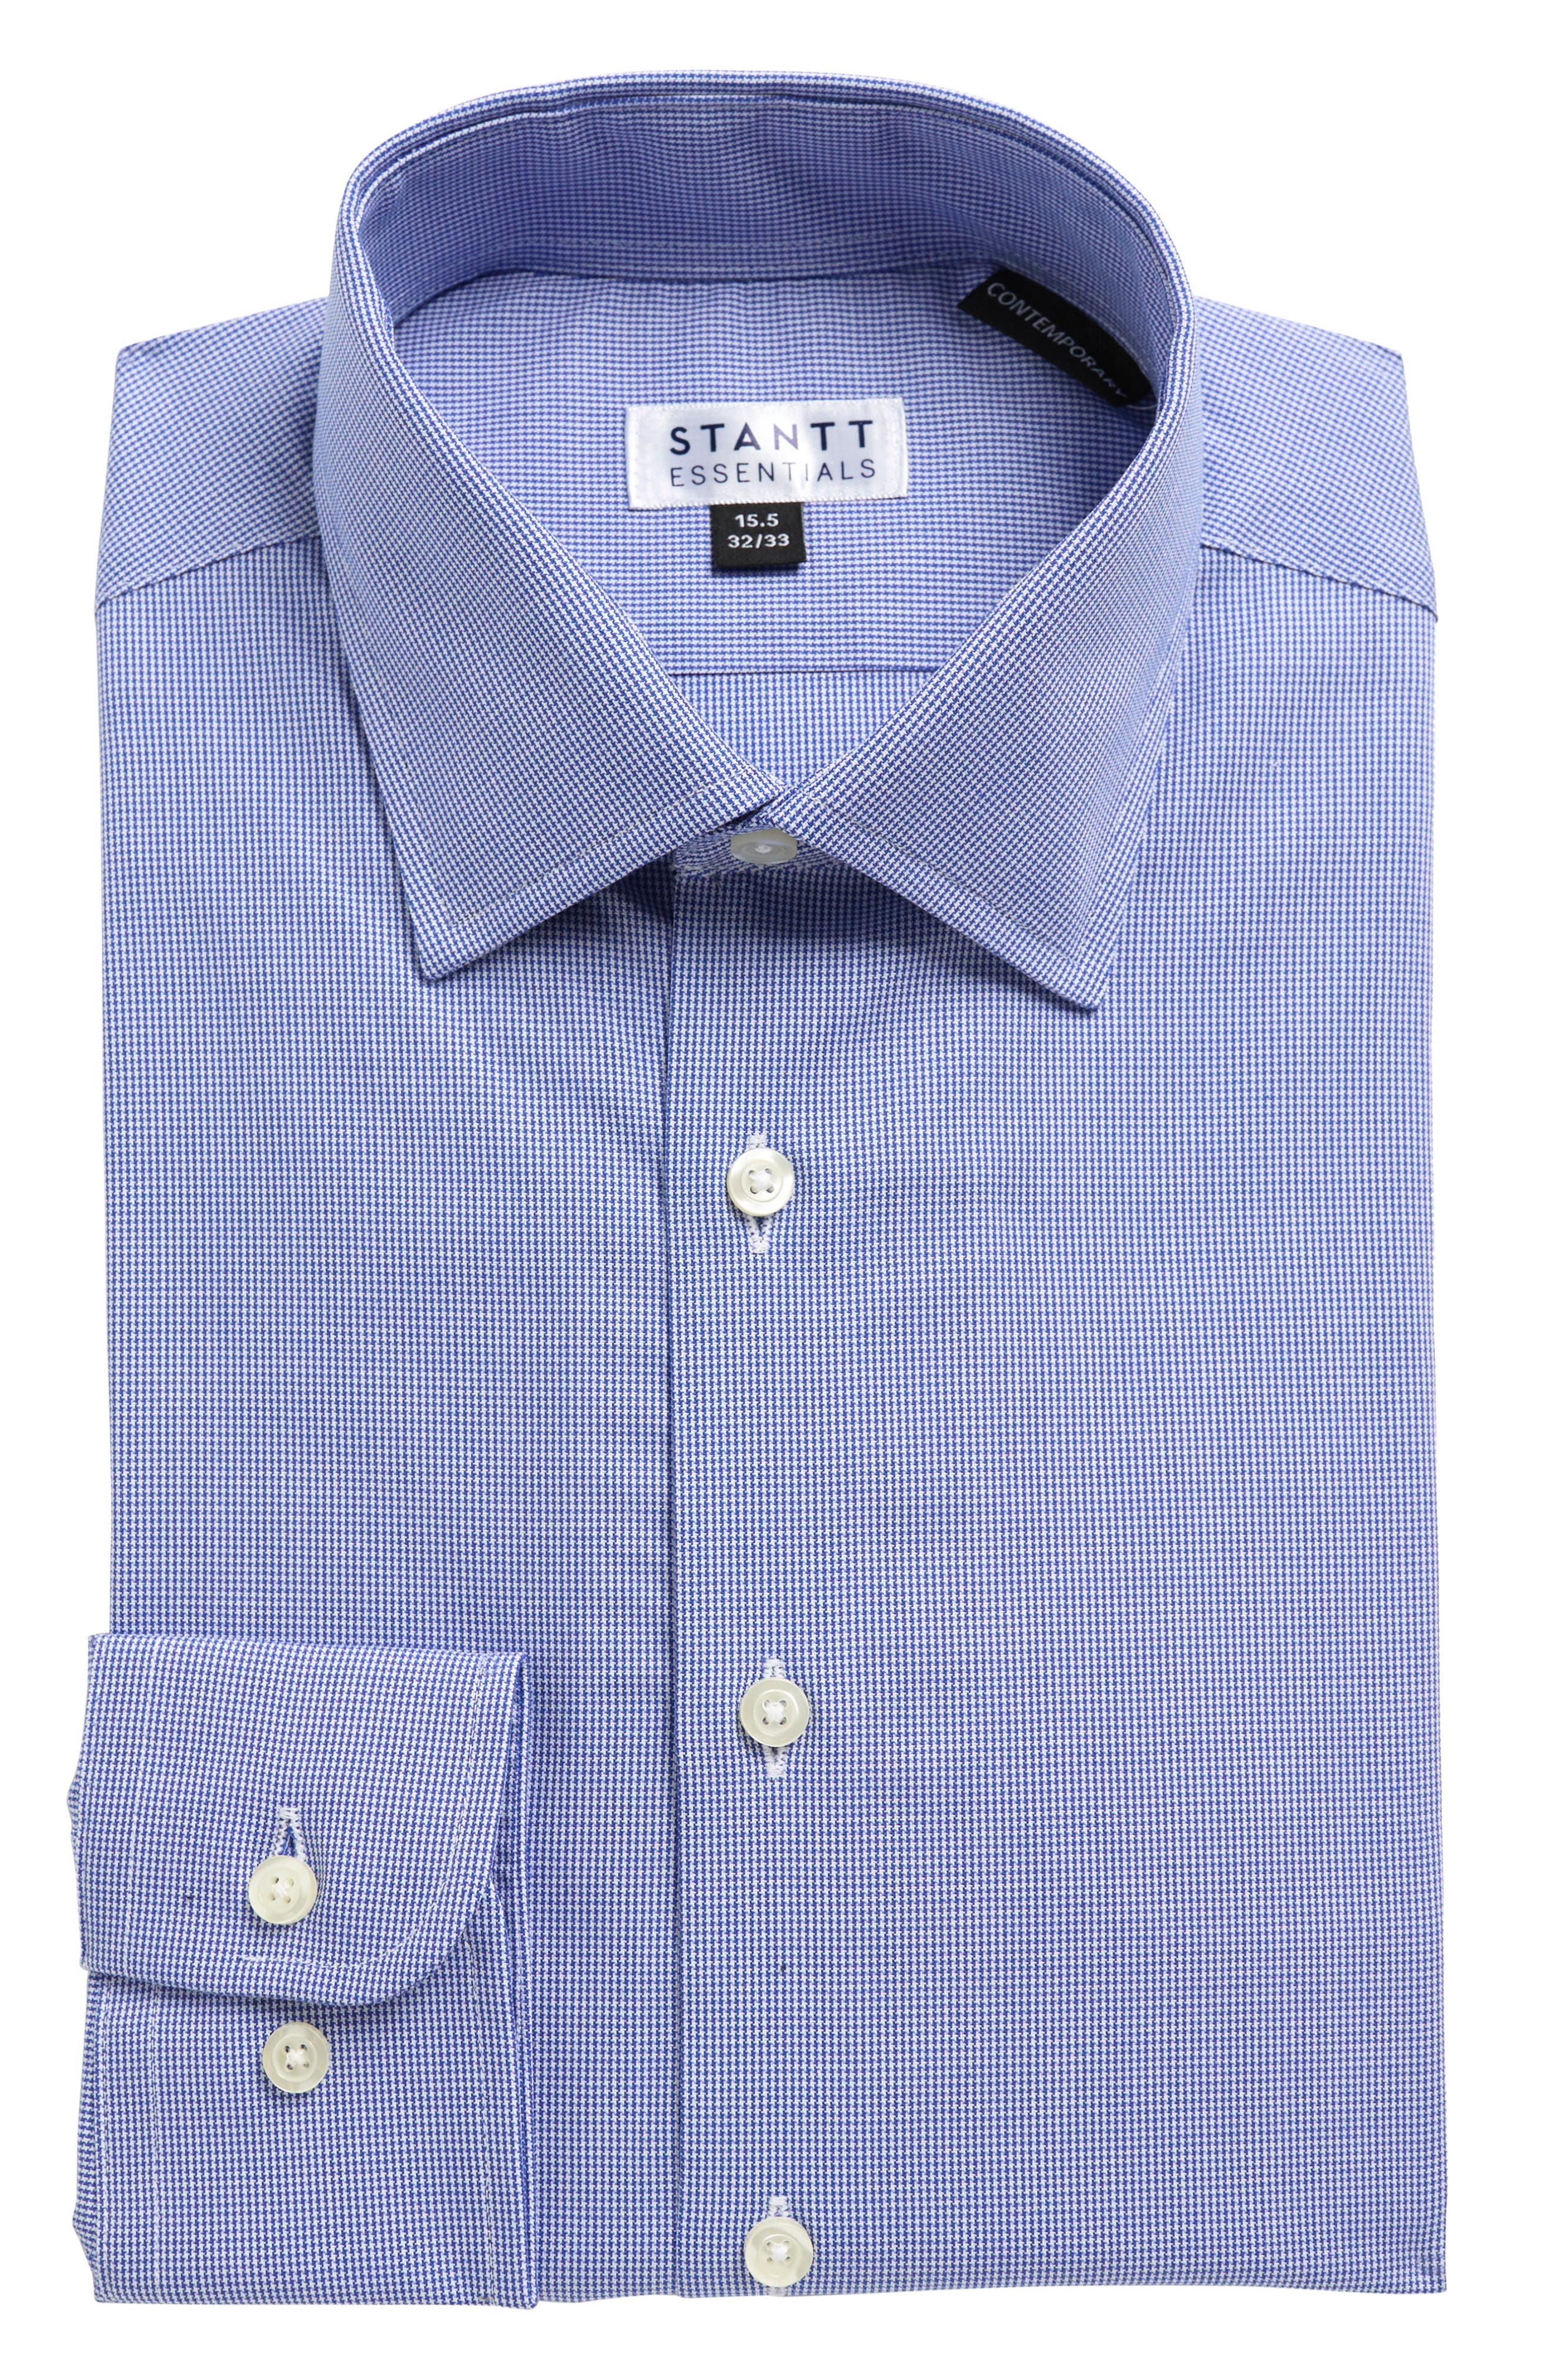 Micro Houndstooth Contemporary Fit Dress Shirt STANTT ESSENTIALS